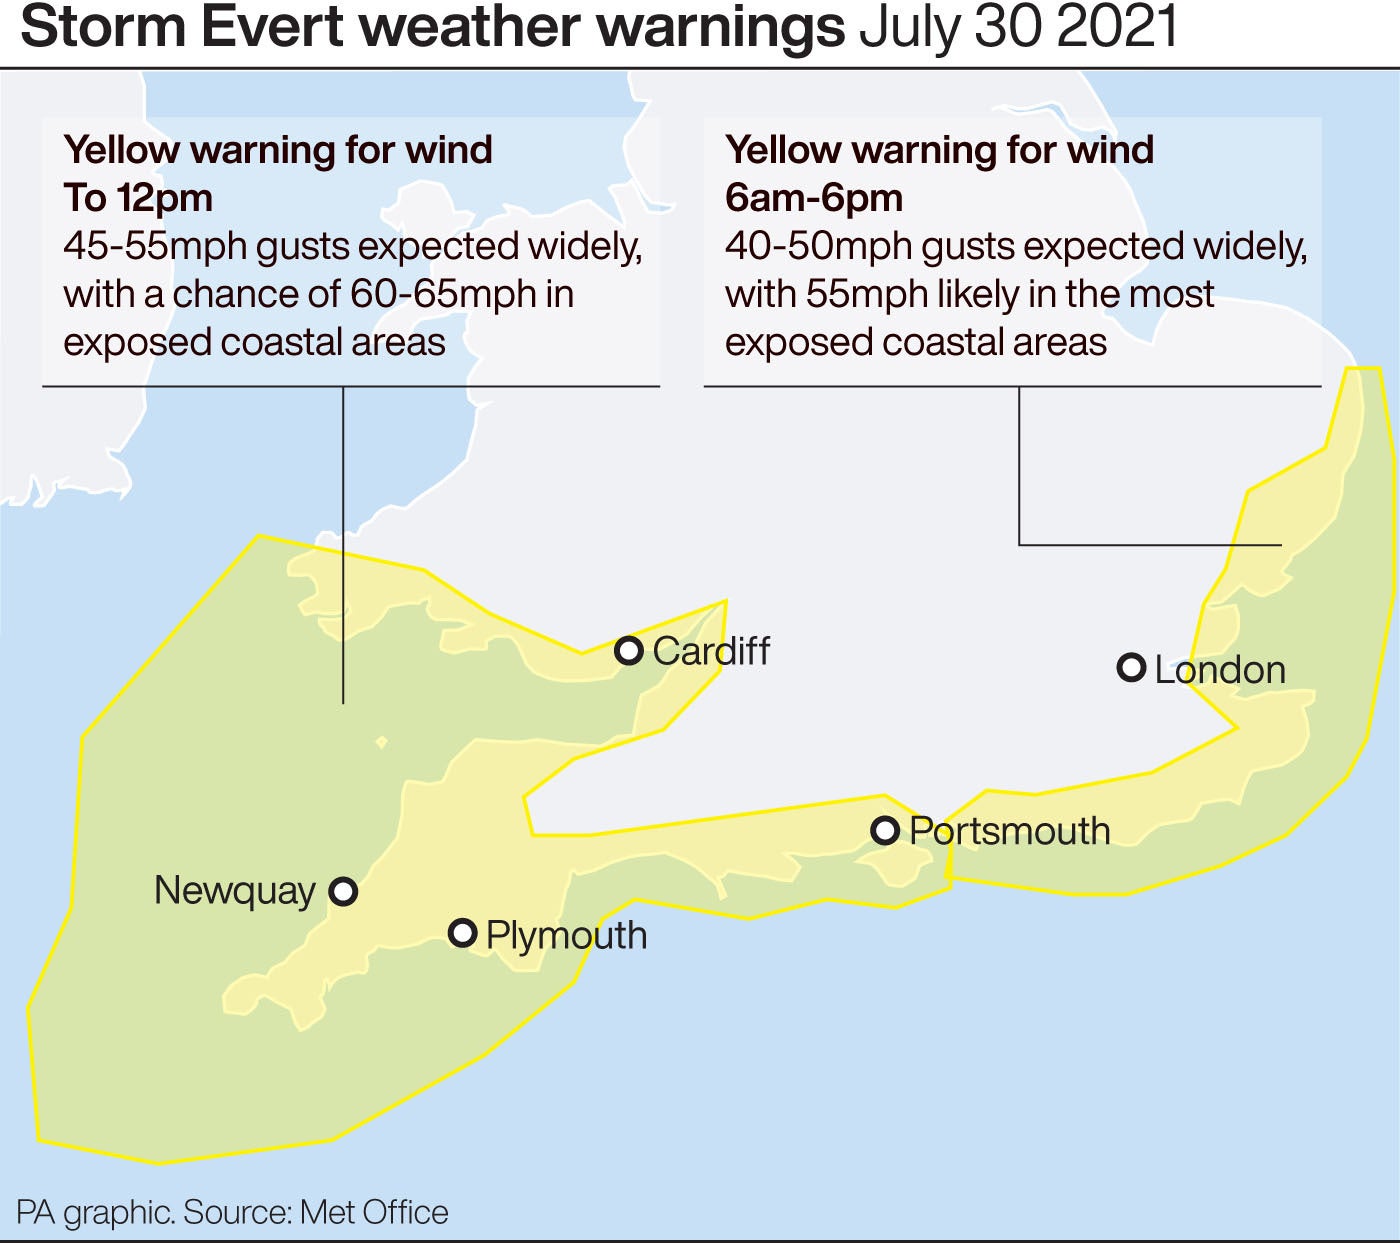 The storm is expected to move eastwards from the Cornwall area